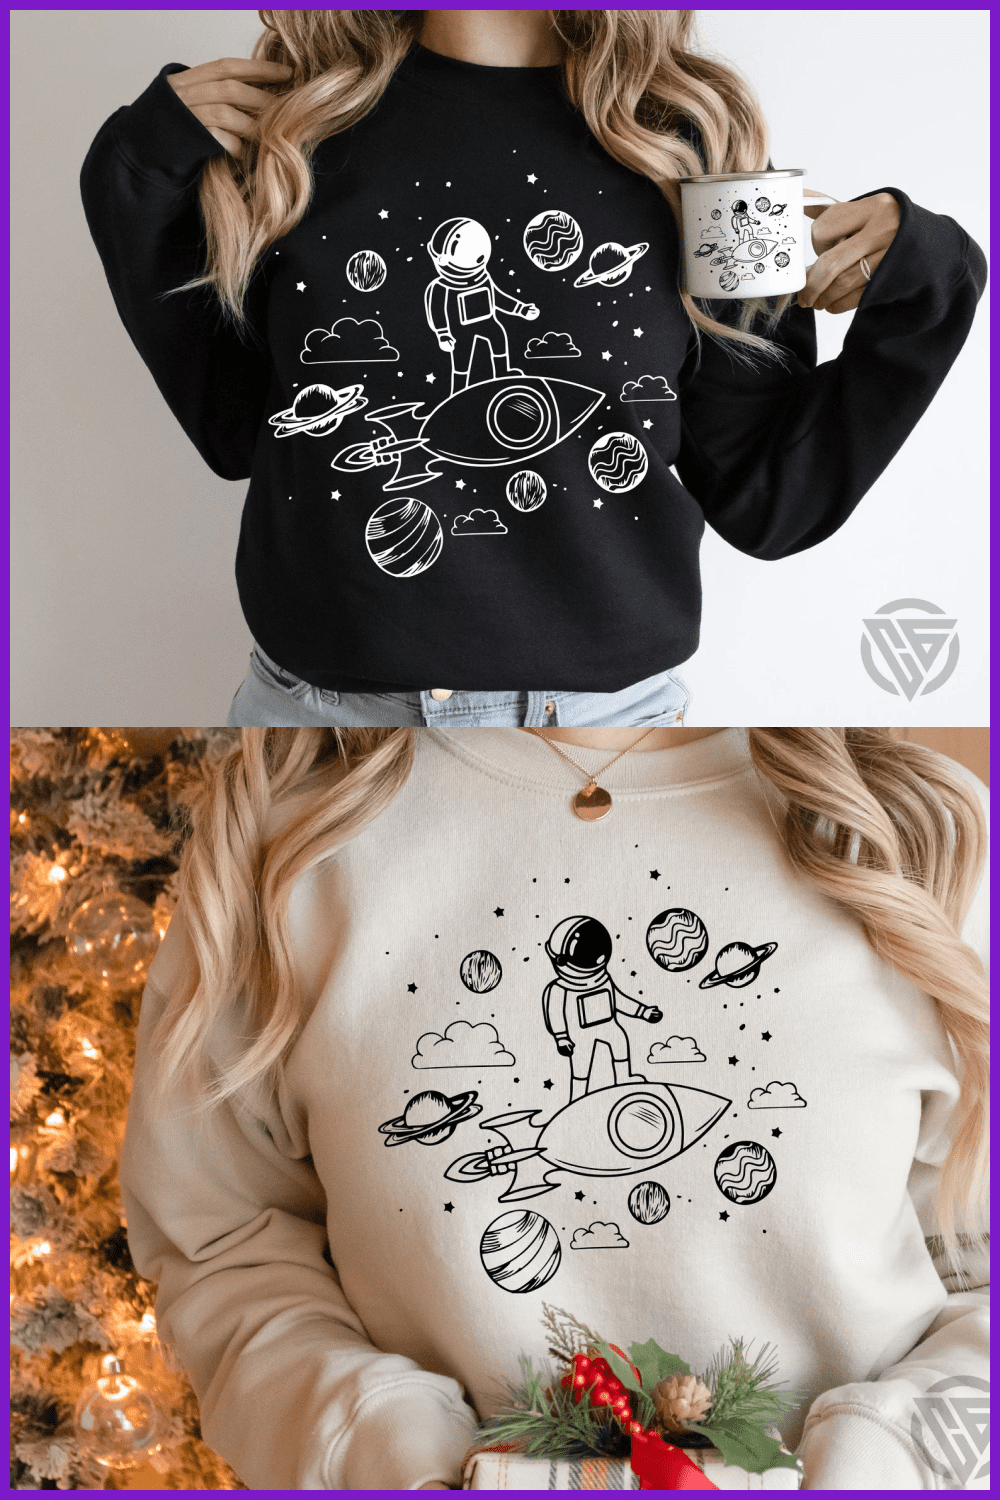 Sketch of an astronaut on a rocket among the planets printed on a hoodie.